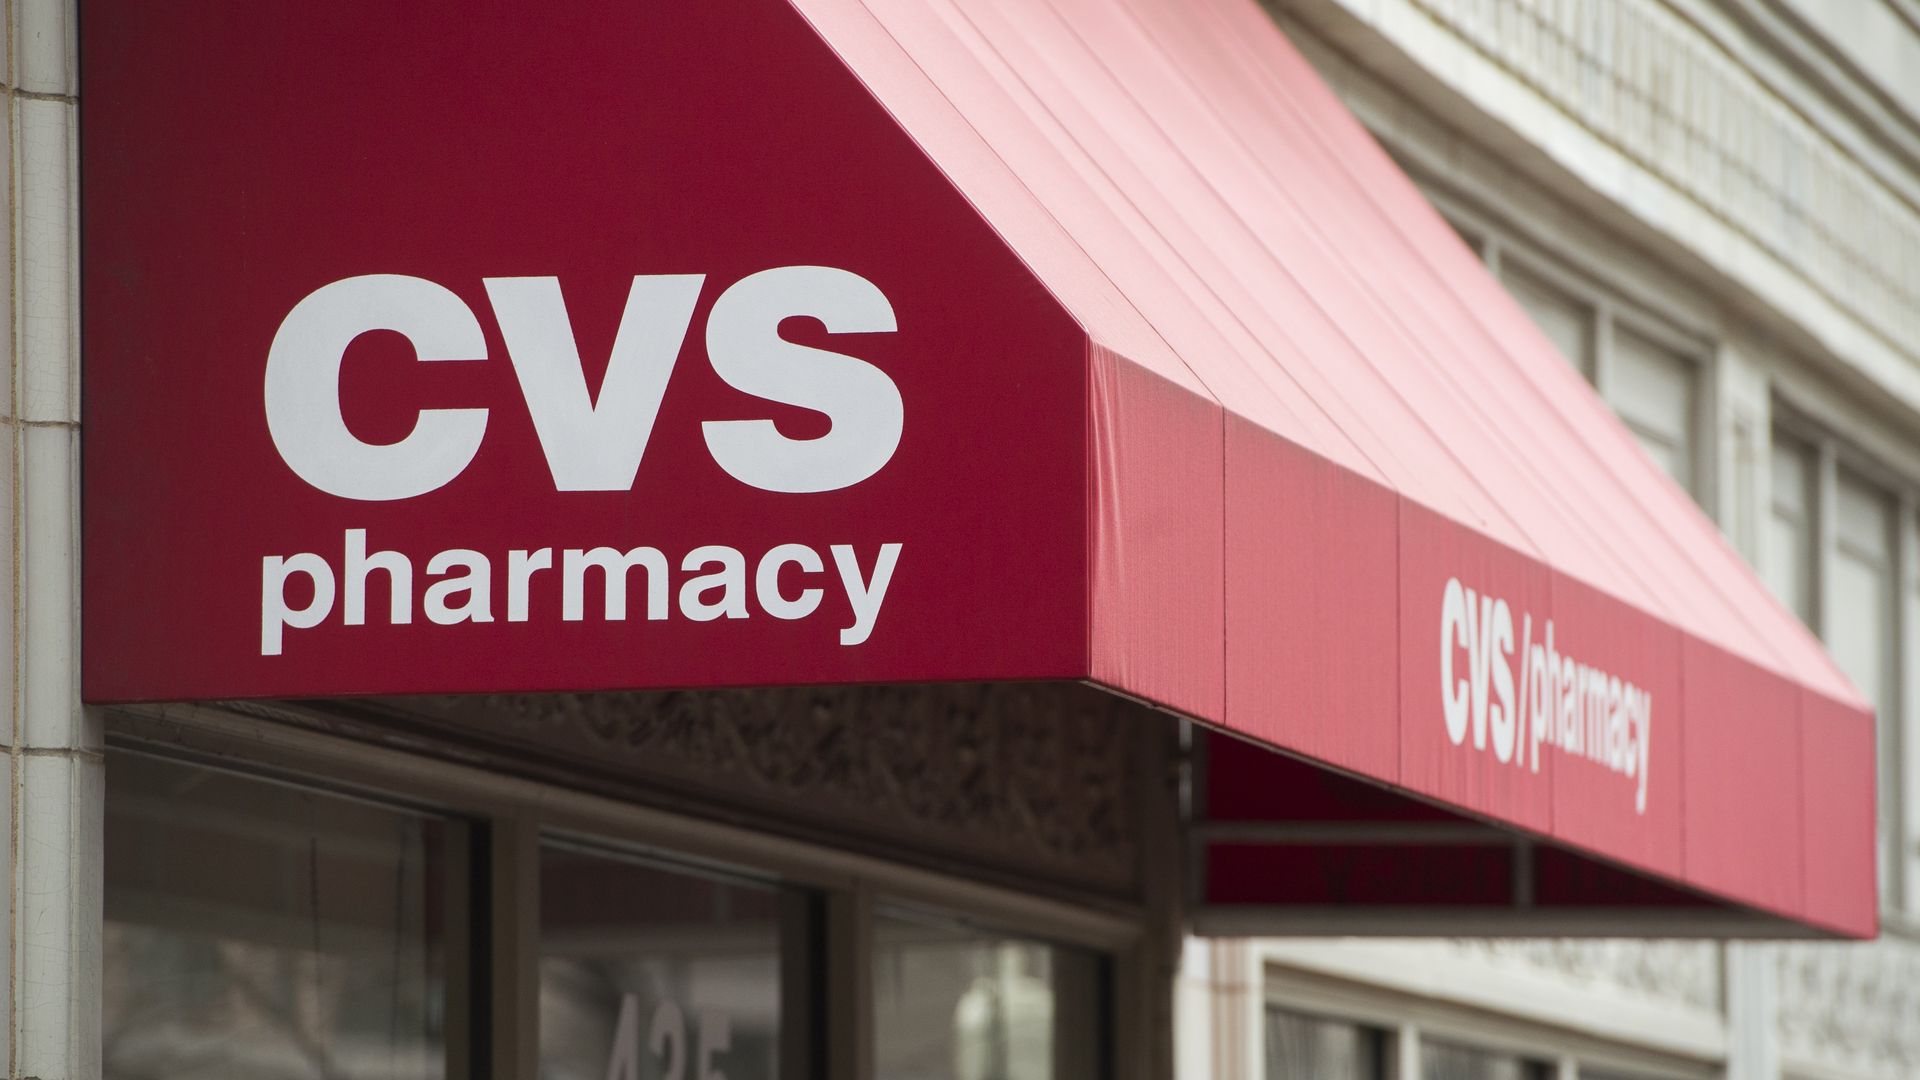 An awning that reads CVS pharmacy.